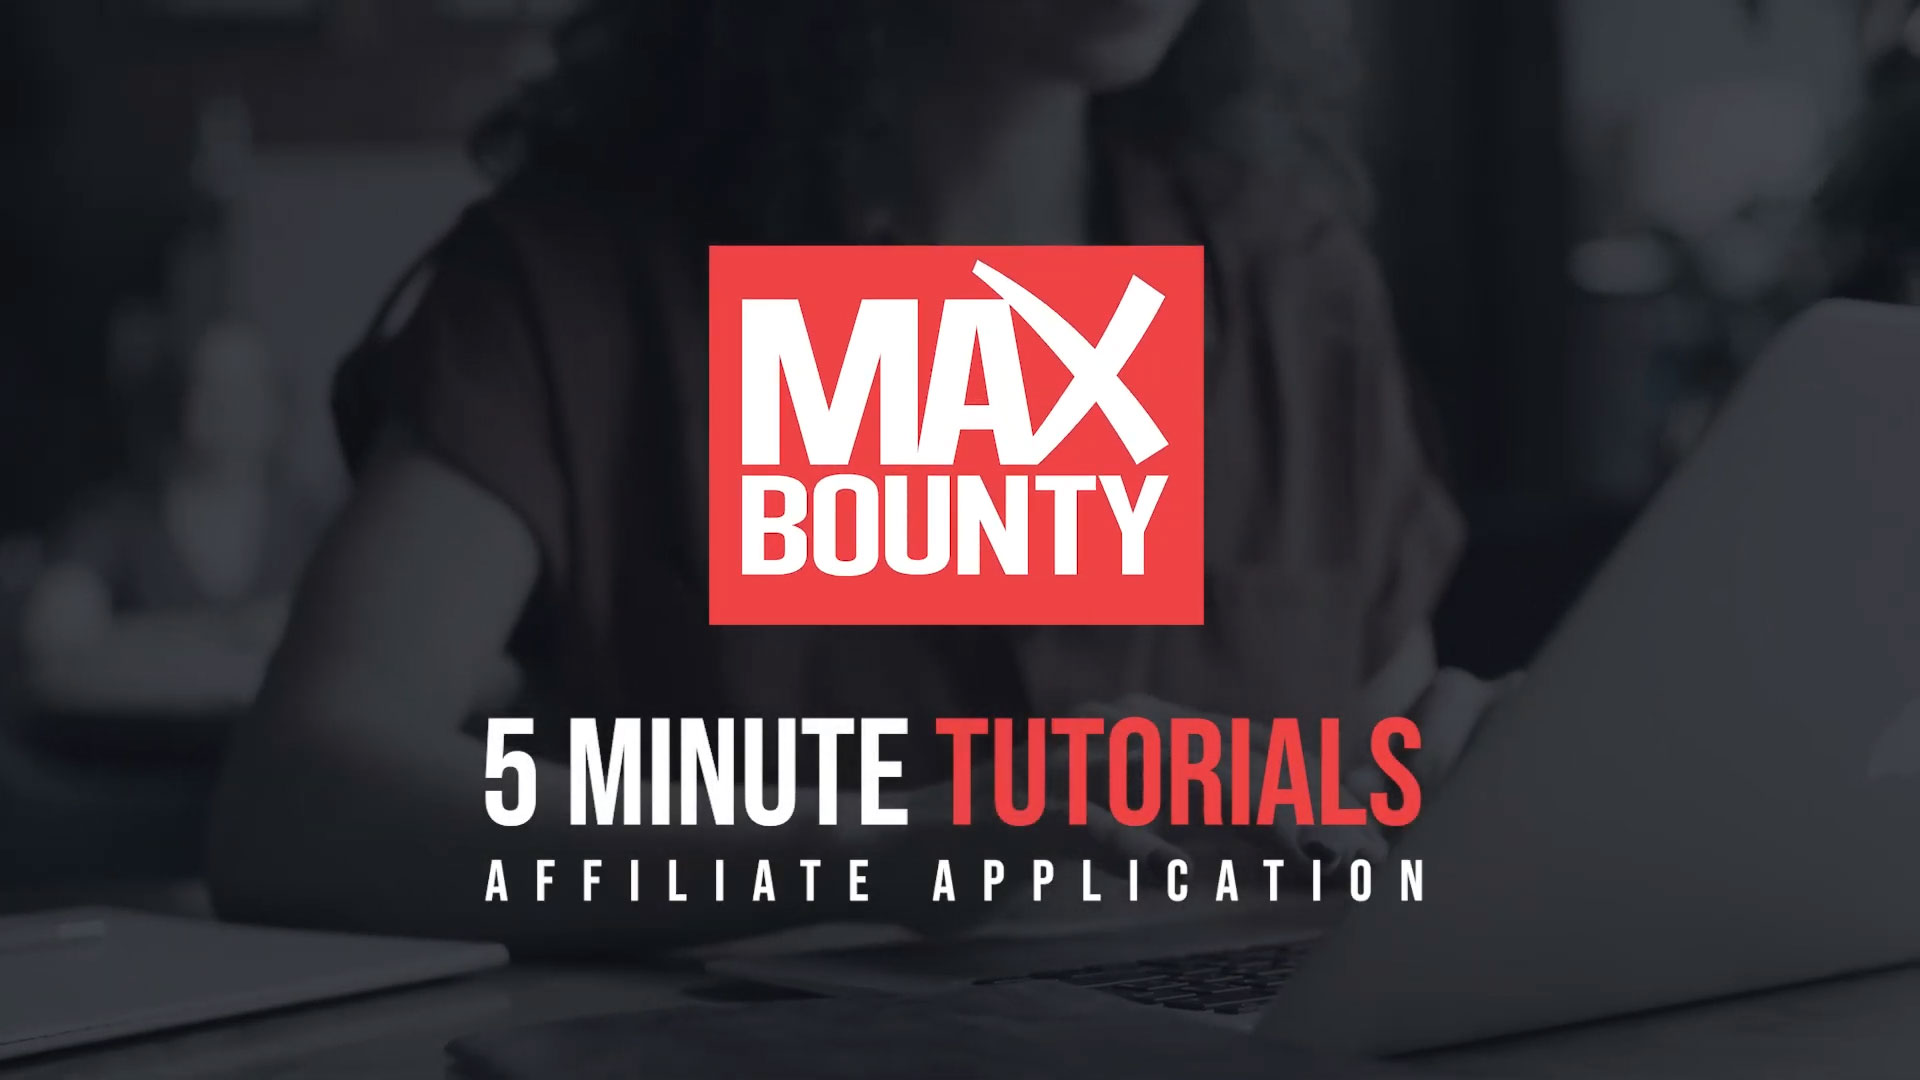 WATCH: Learn How to Become a MaxBounty Affiliate in 5 Minutes in New Tutorial Video